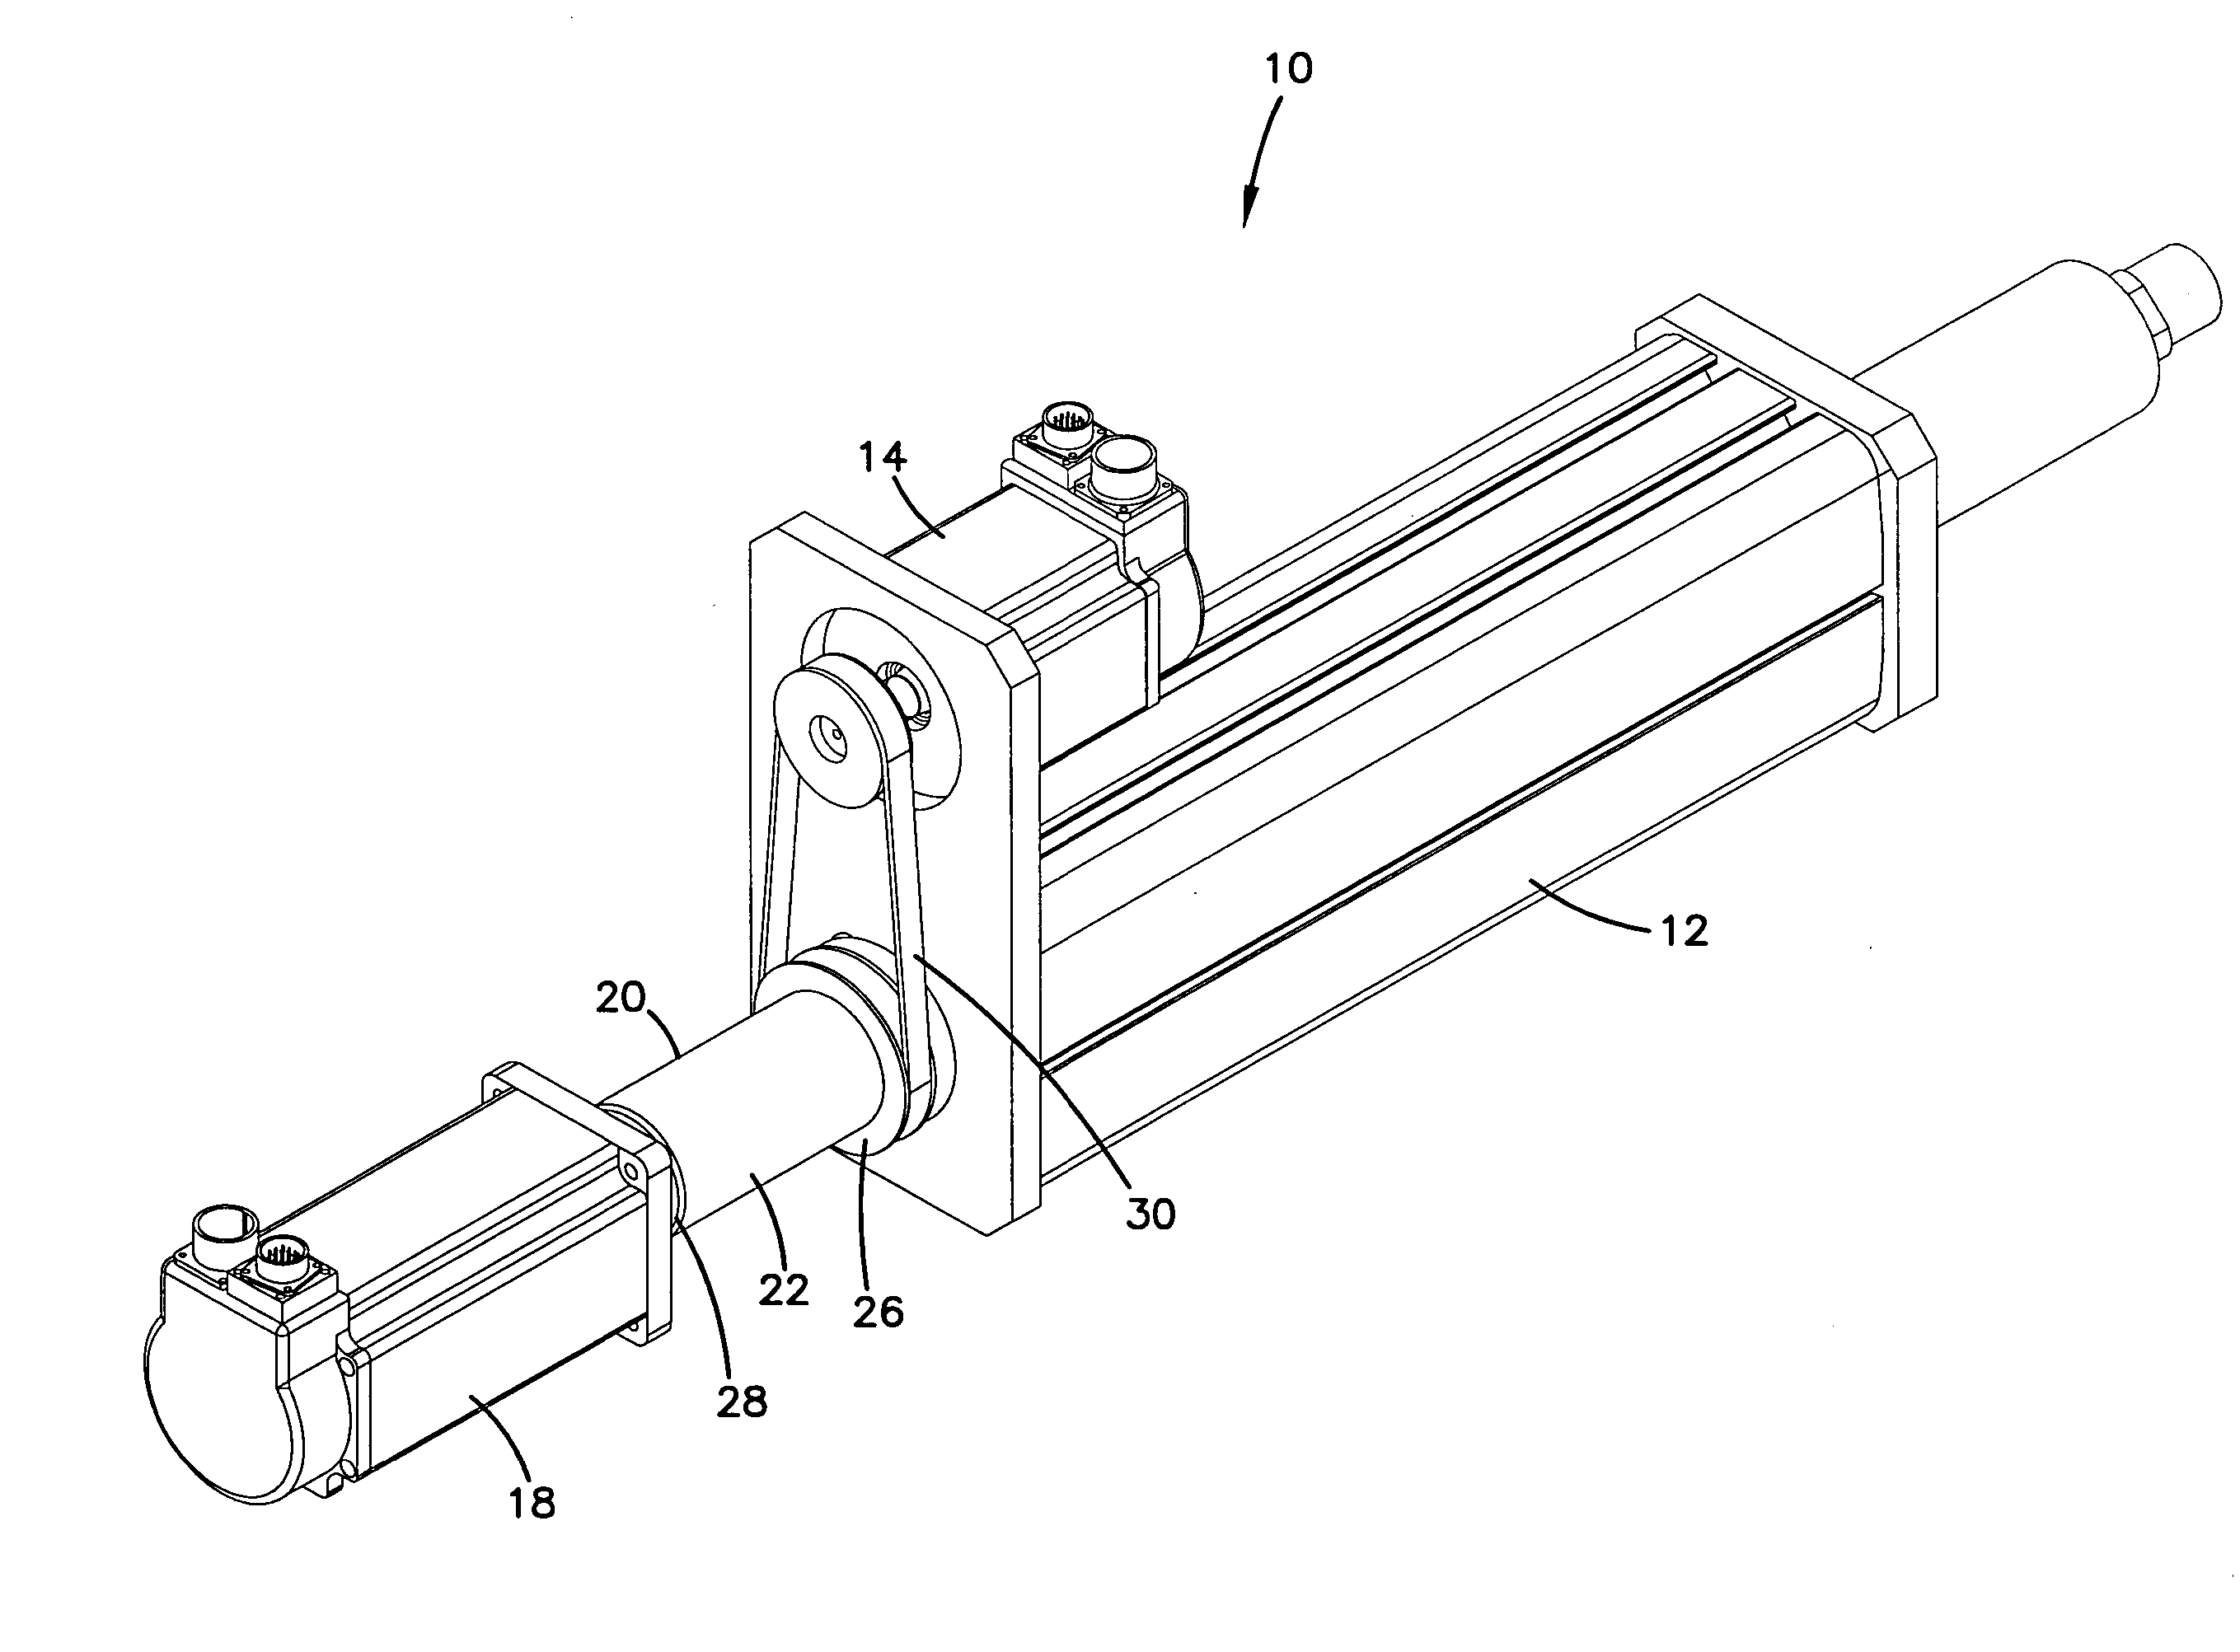 Linear actuator system and method